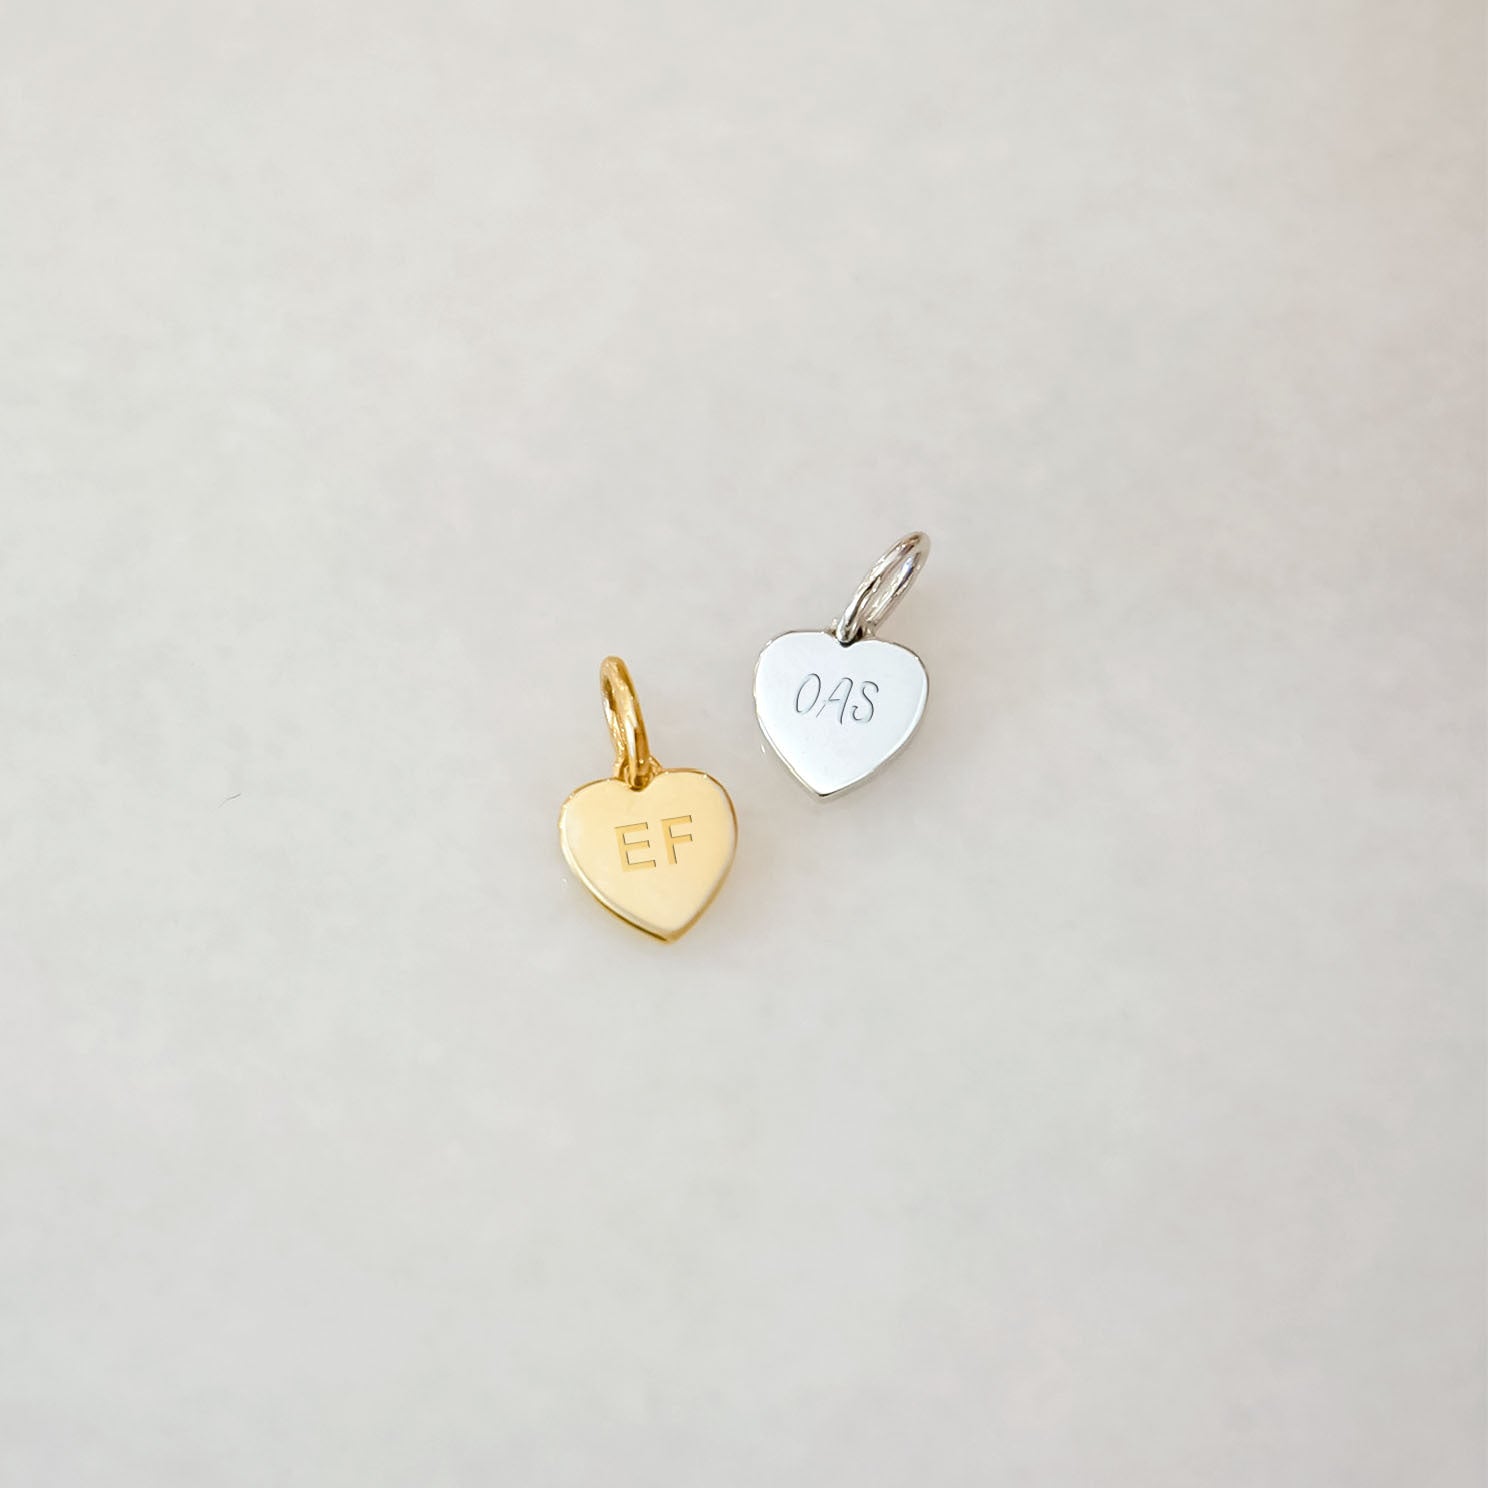 Gold Heart Necklace Charm in yellow gold and white gold engraved with initials EF and OAS